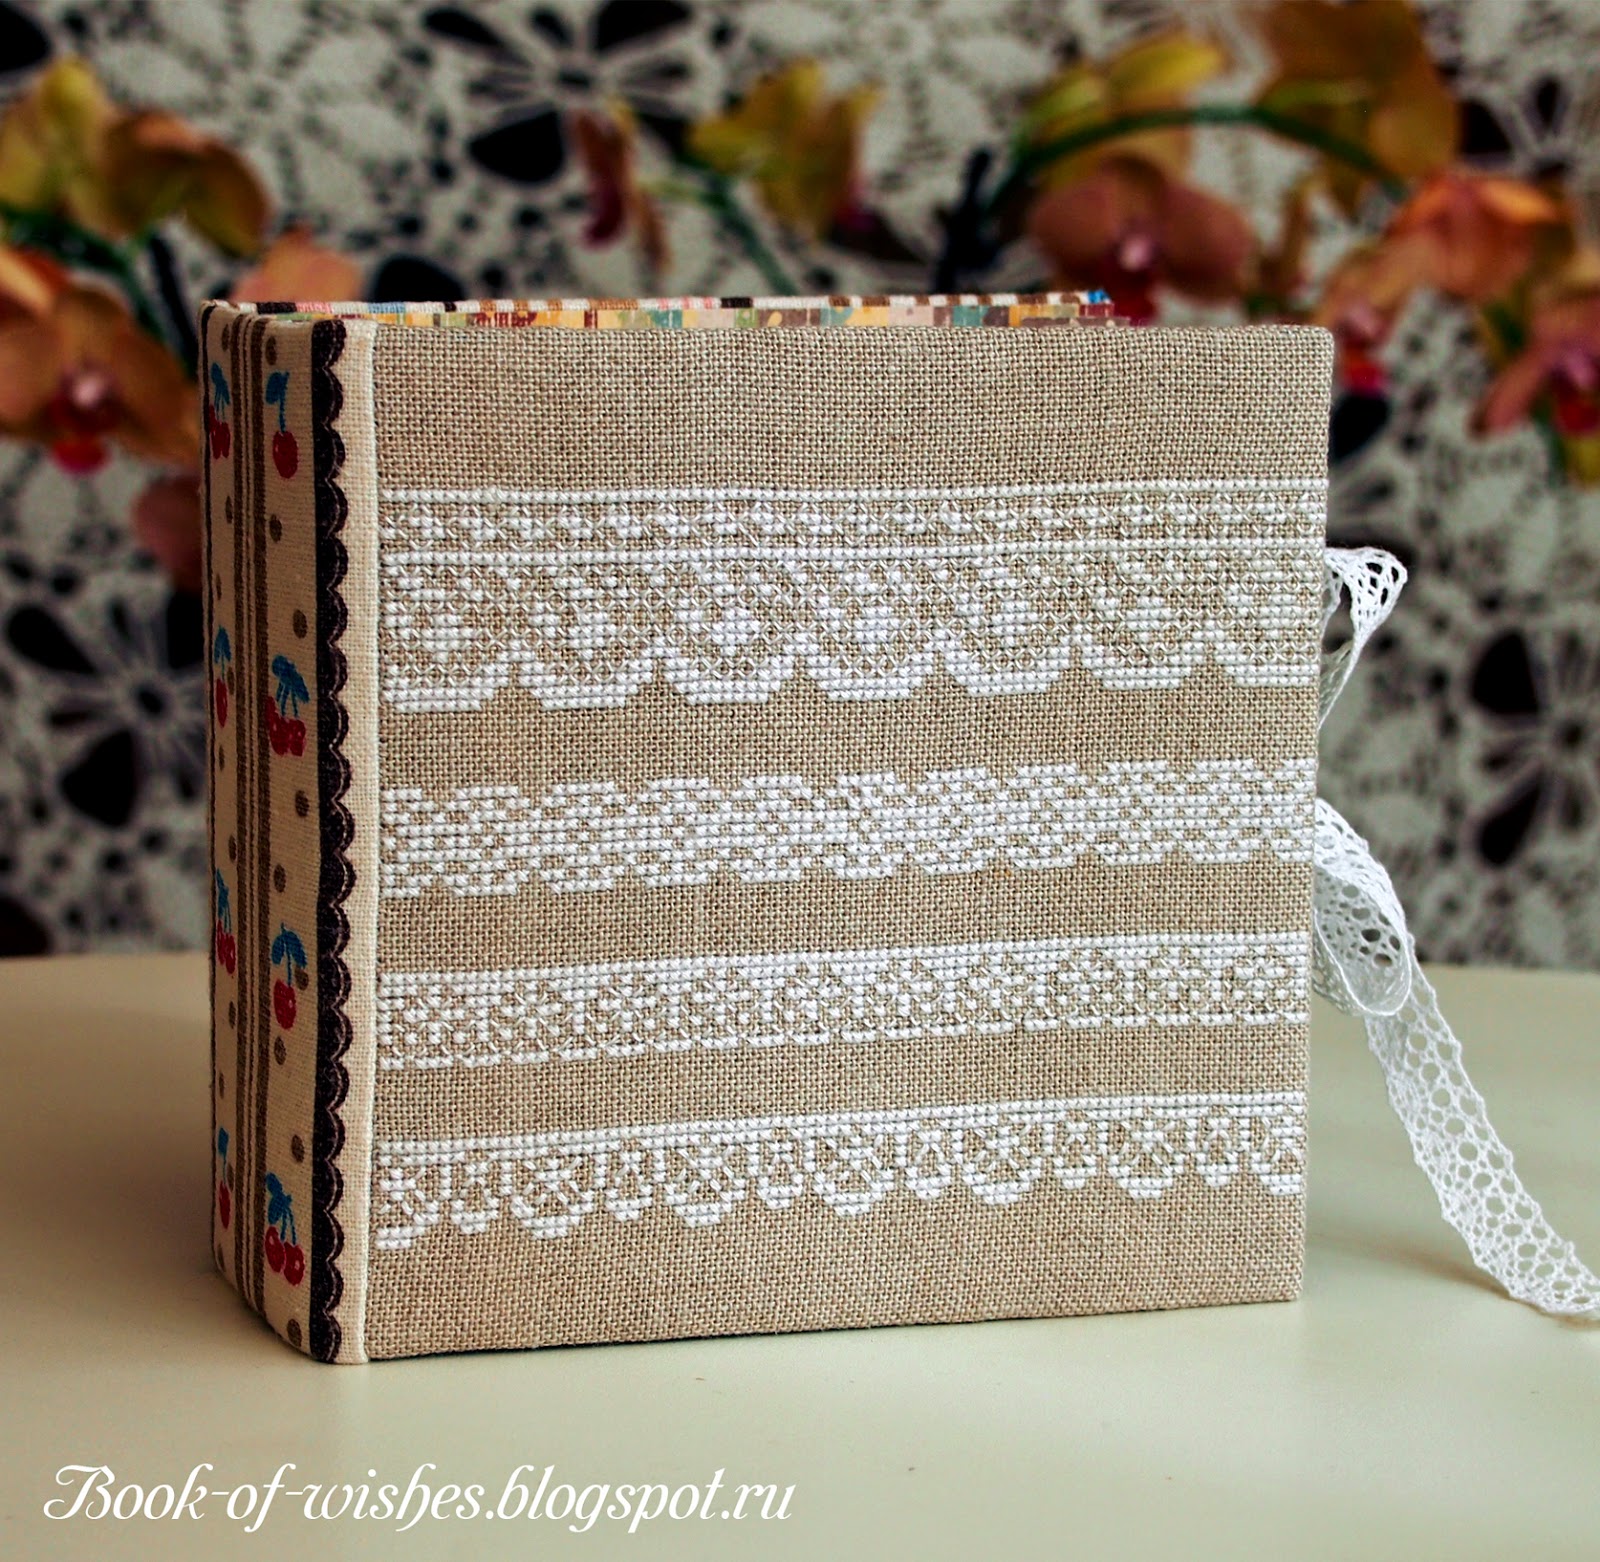 Lace book